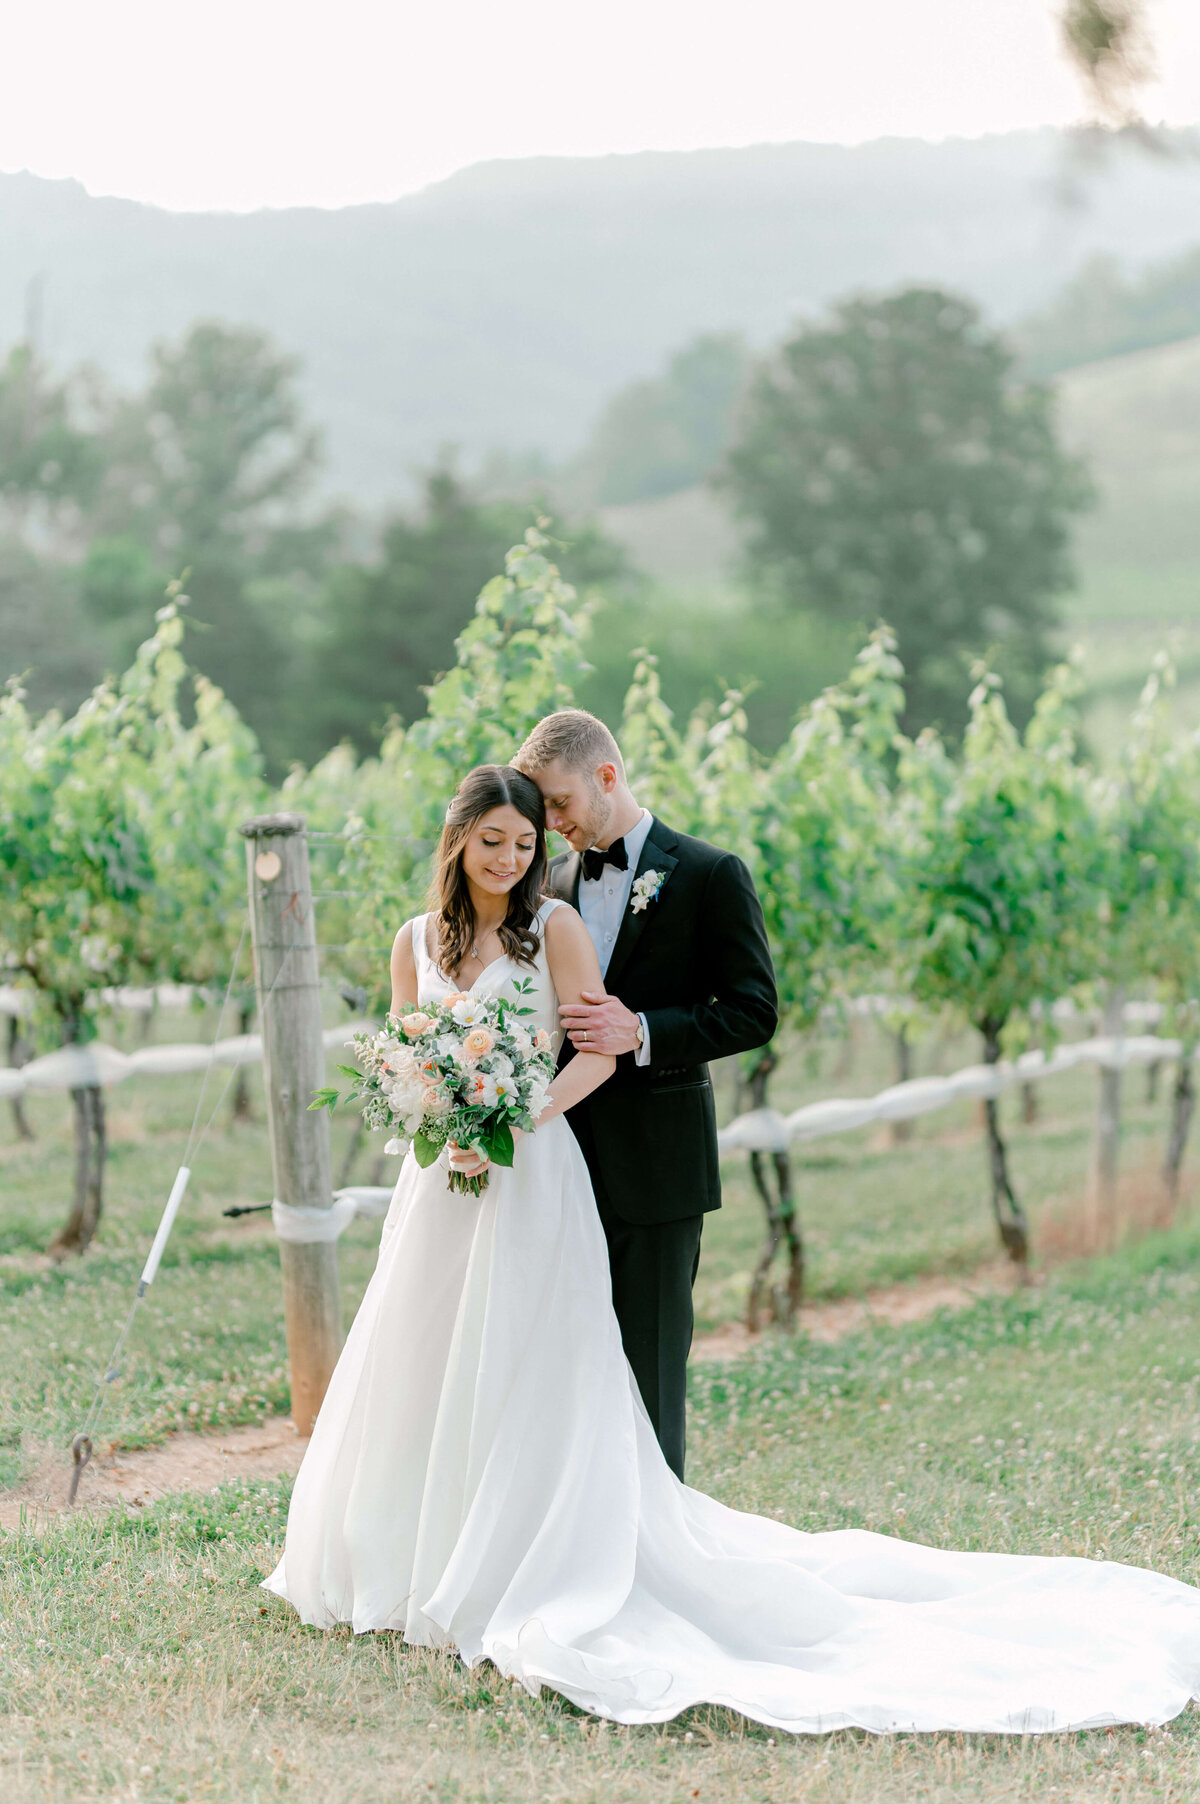 Groom nuzzling to his bride in a picturesque vineyard located in Leesburg, Virginia